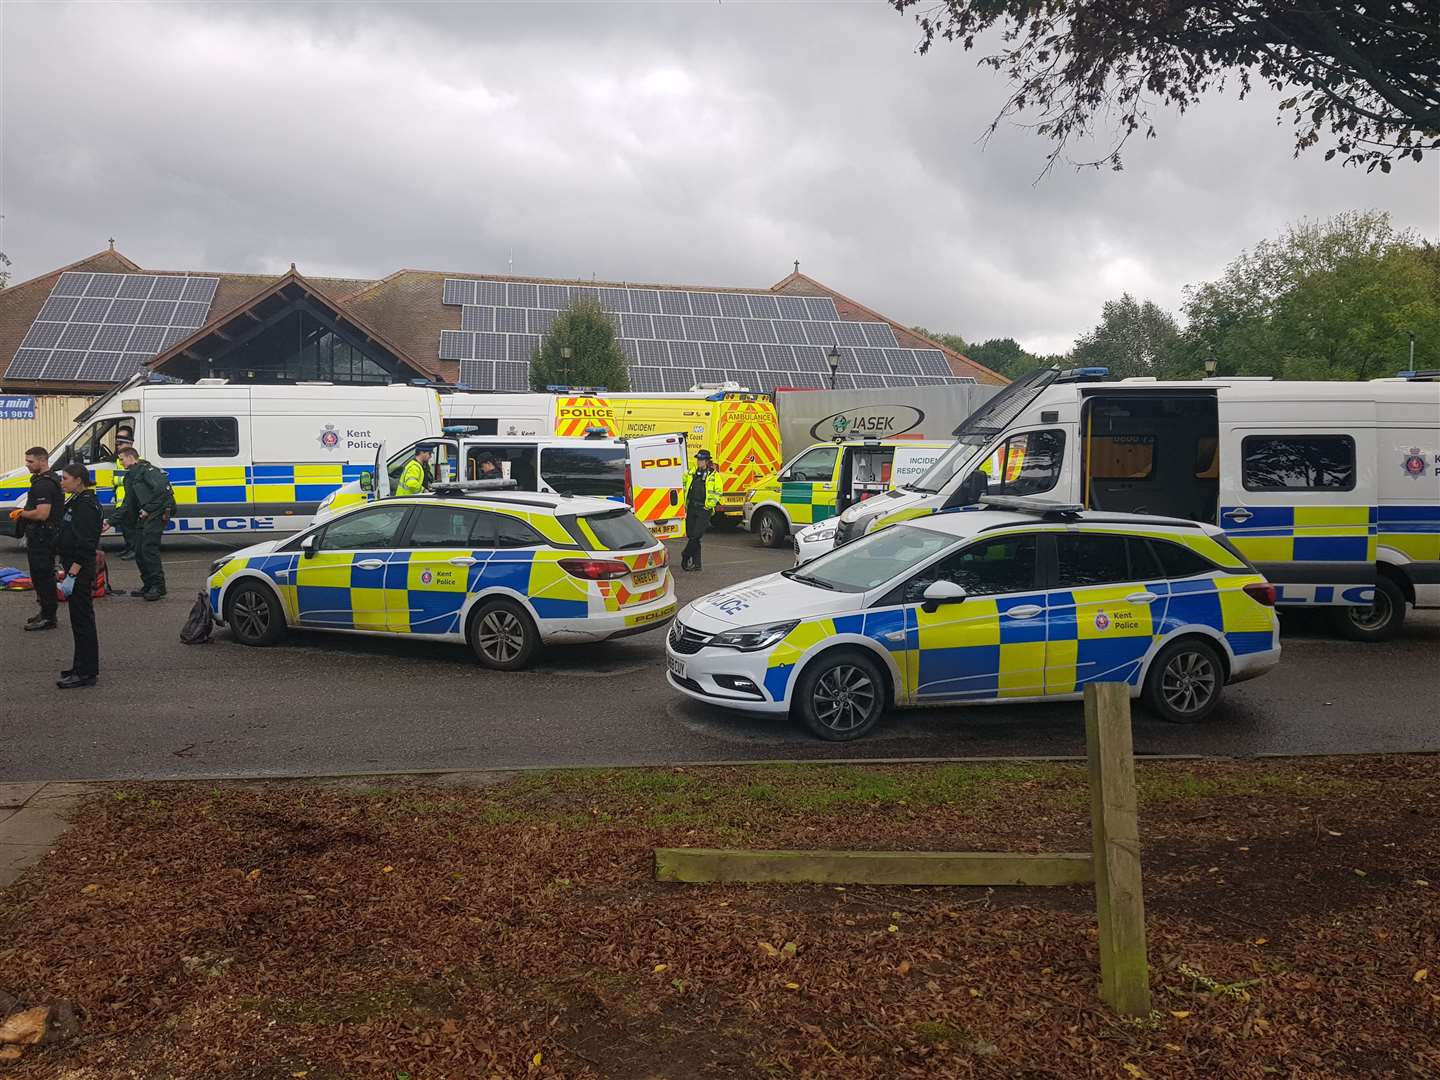 Police at Maidstone Services. All pictures: Sean Briggs